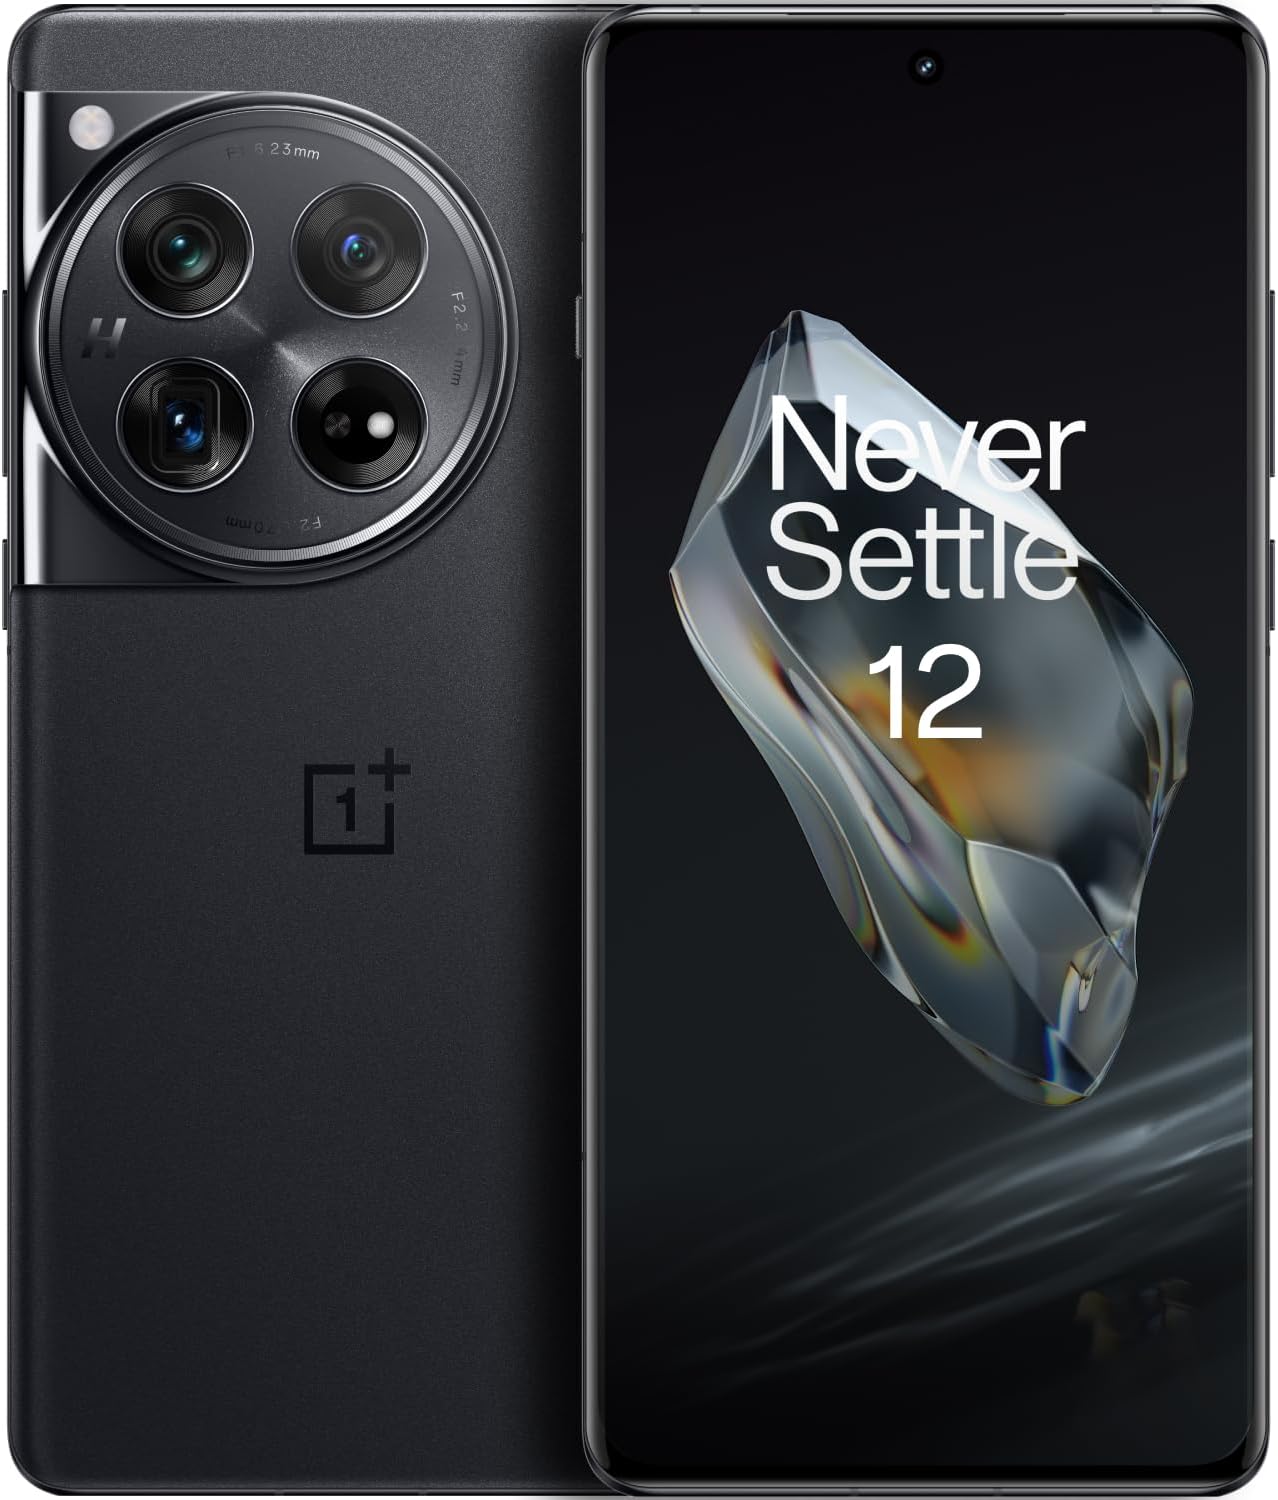 OnePlus 12,12GB RAM+256GB,Dual-SIM,Unlocked Android Smartphone,Supports Fastest 50W Wireless Charging,with The Latest Mobile Processor,Advanced Hasselblad Camera,5400 mAh Battery,2024,Silky Black